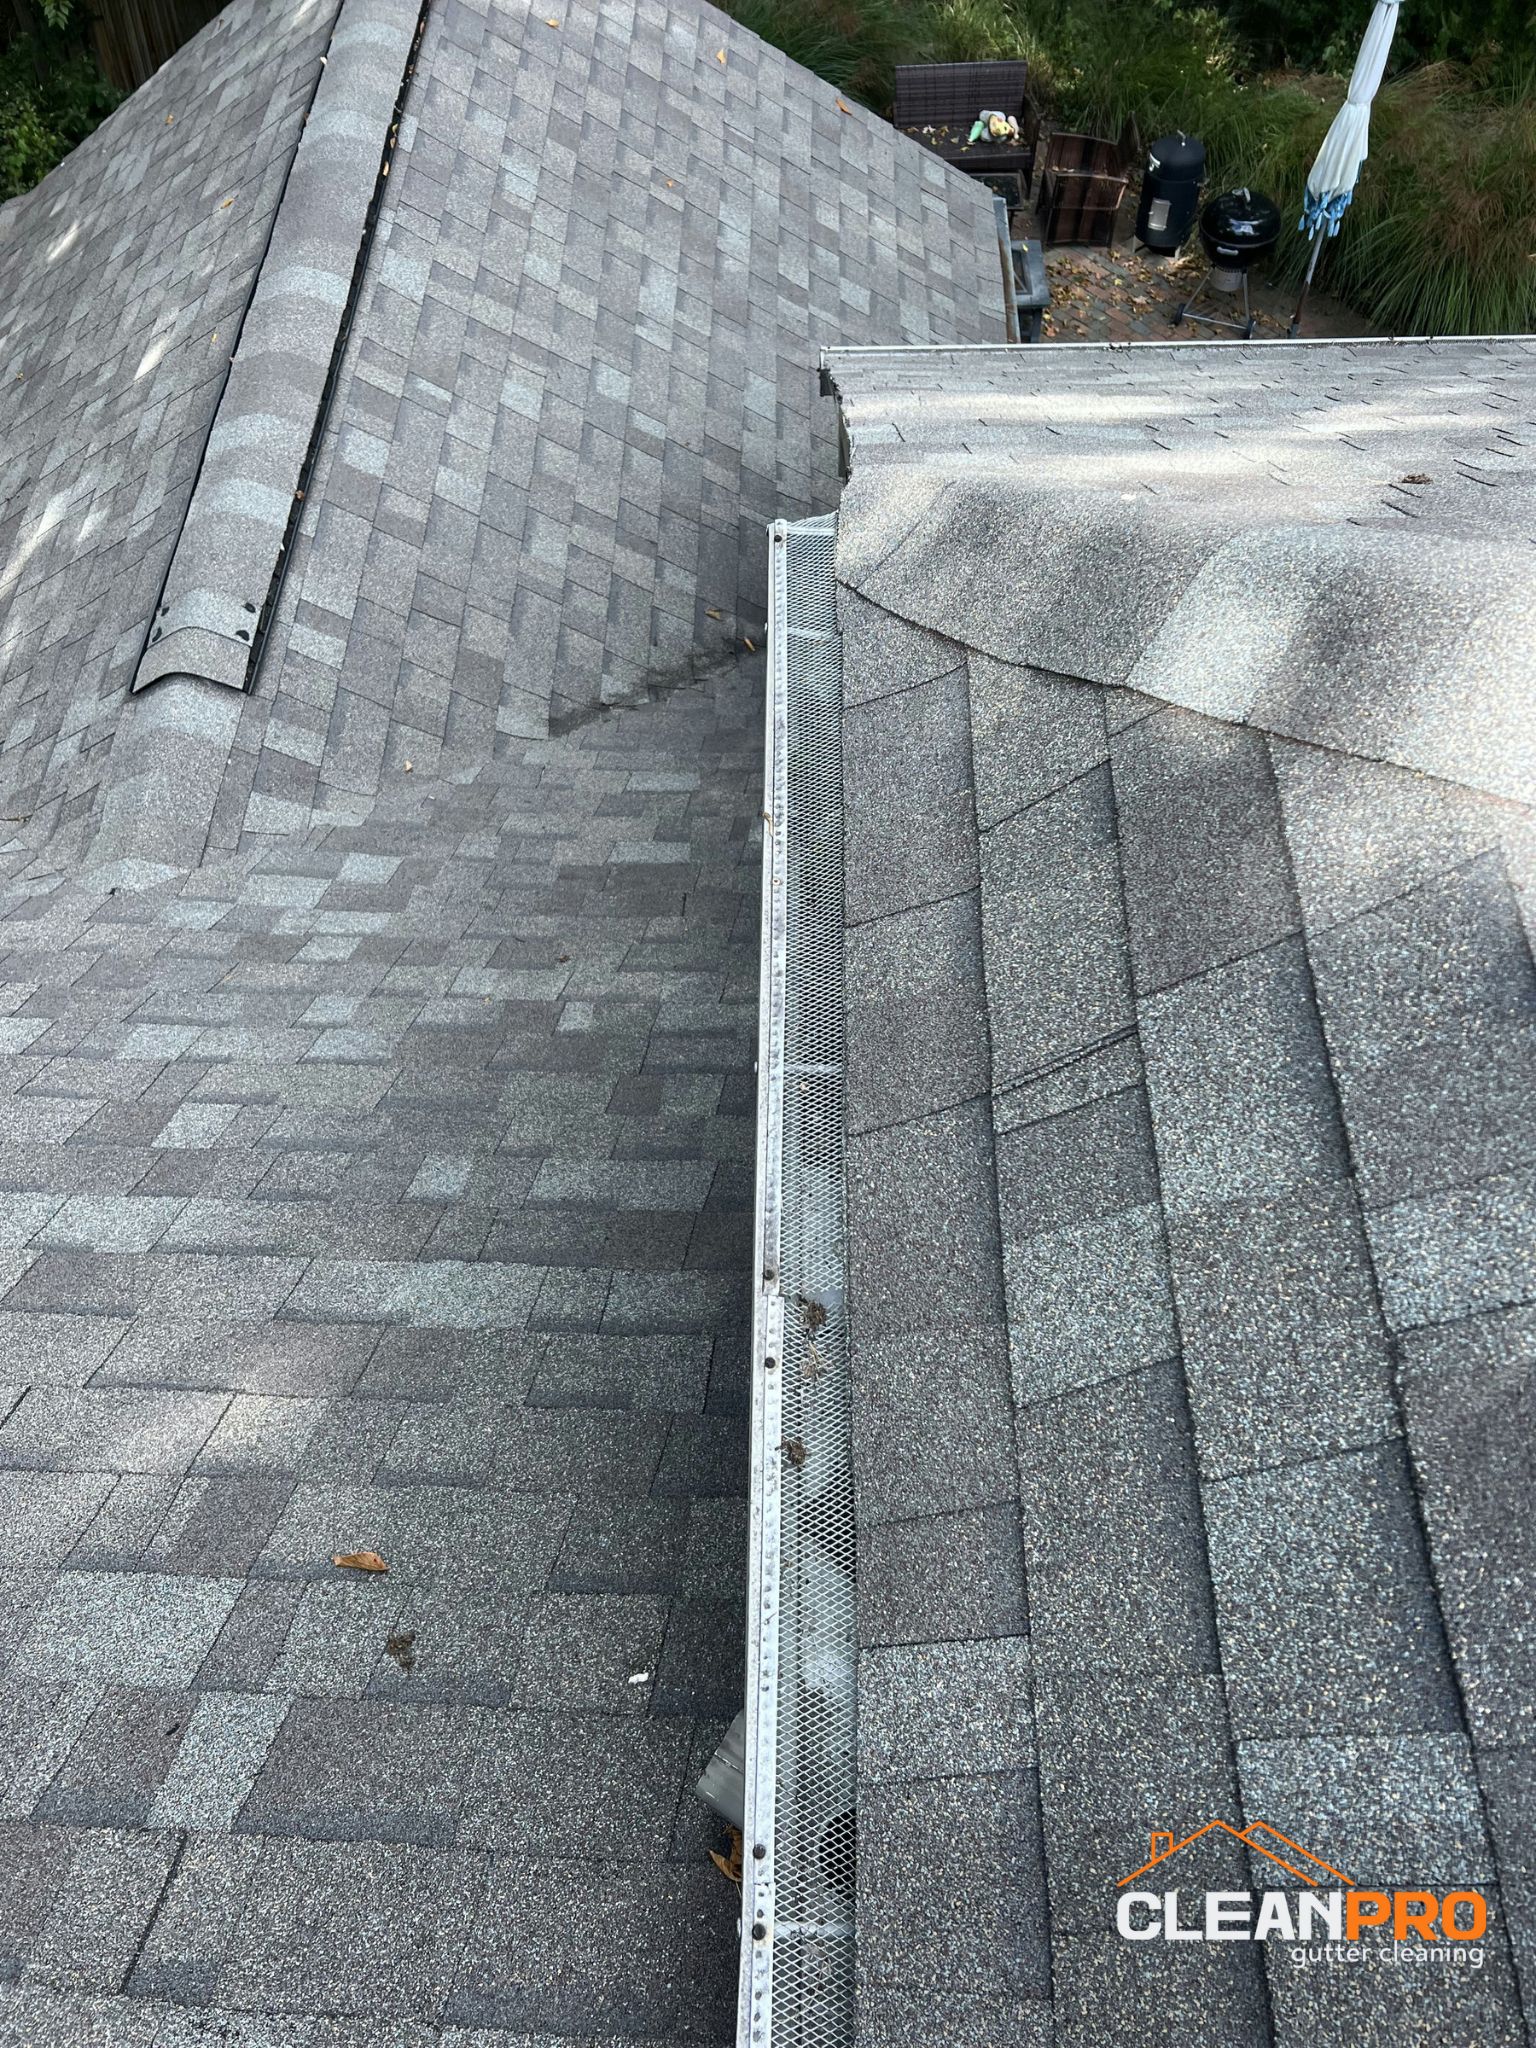 Residential Gutter Cleaning in Oklahoma City OK